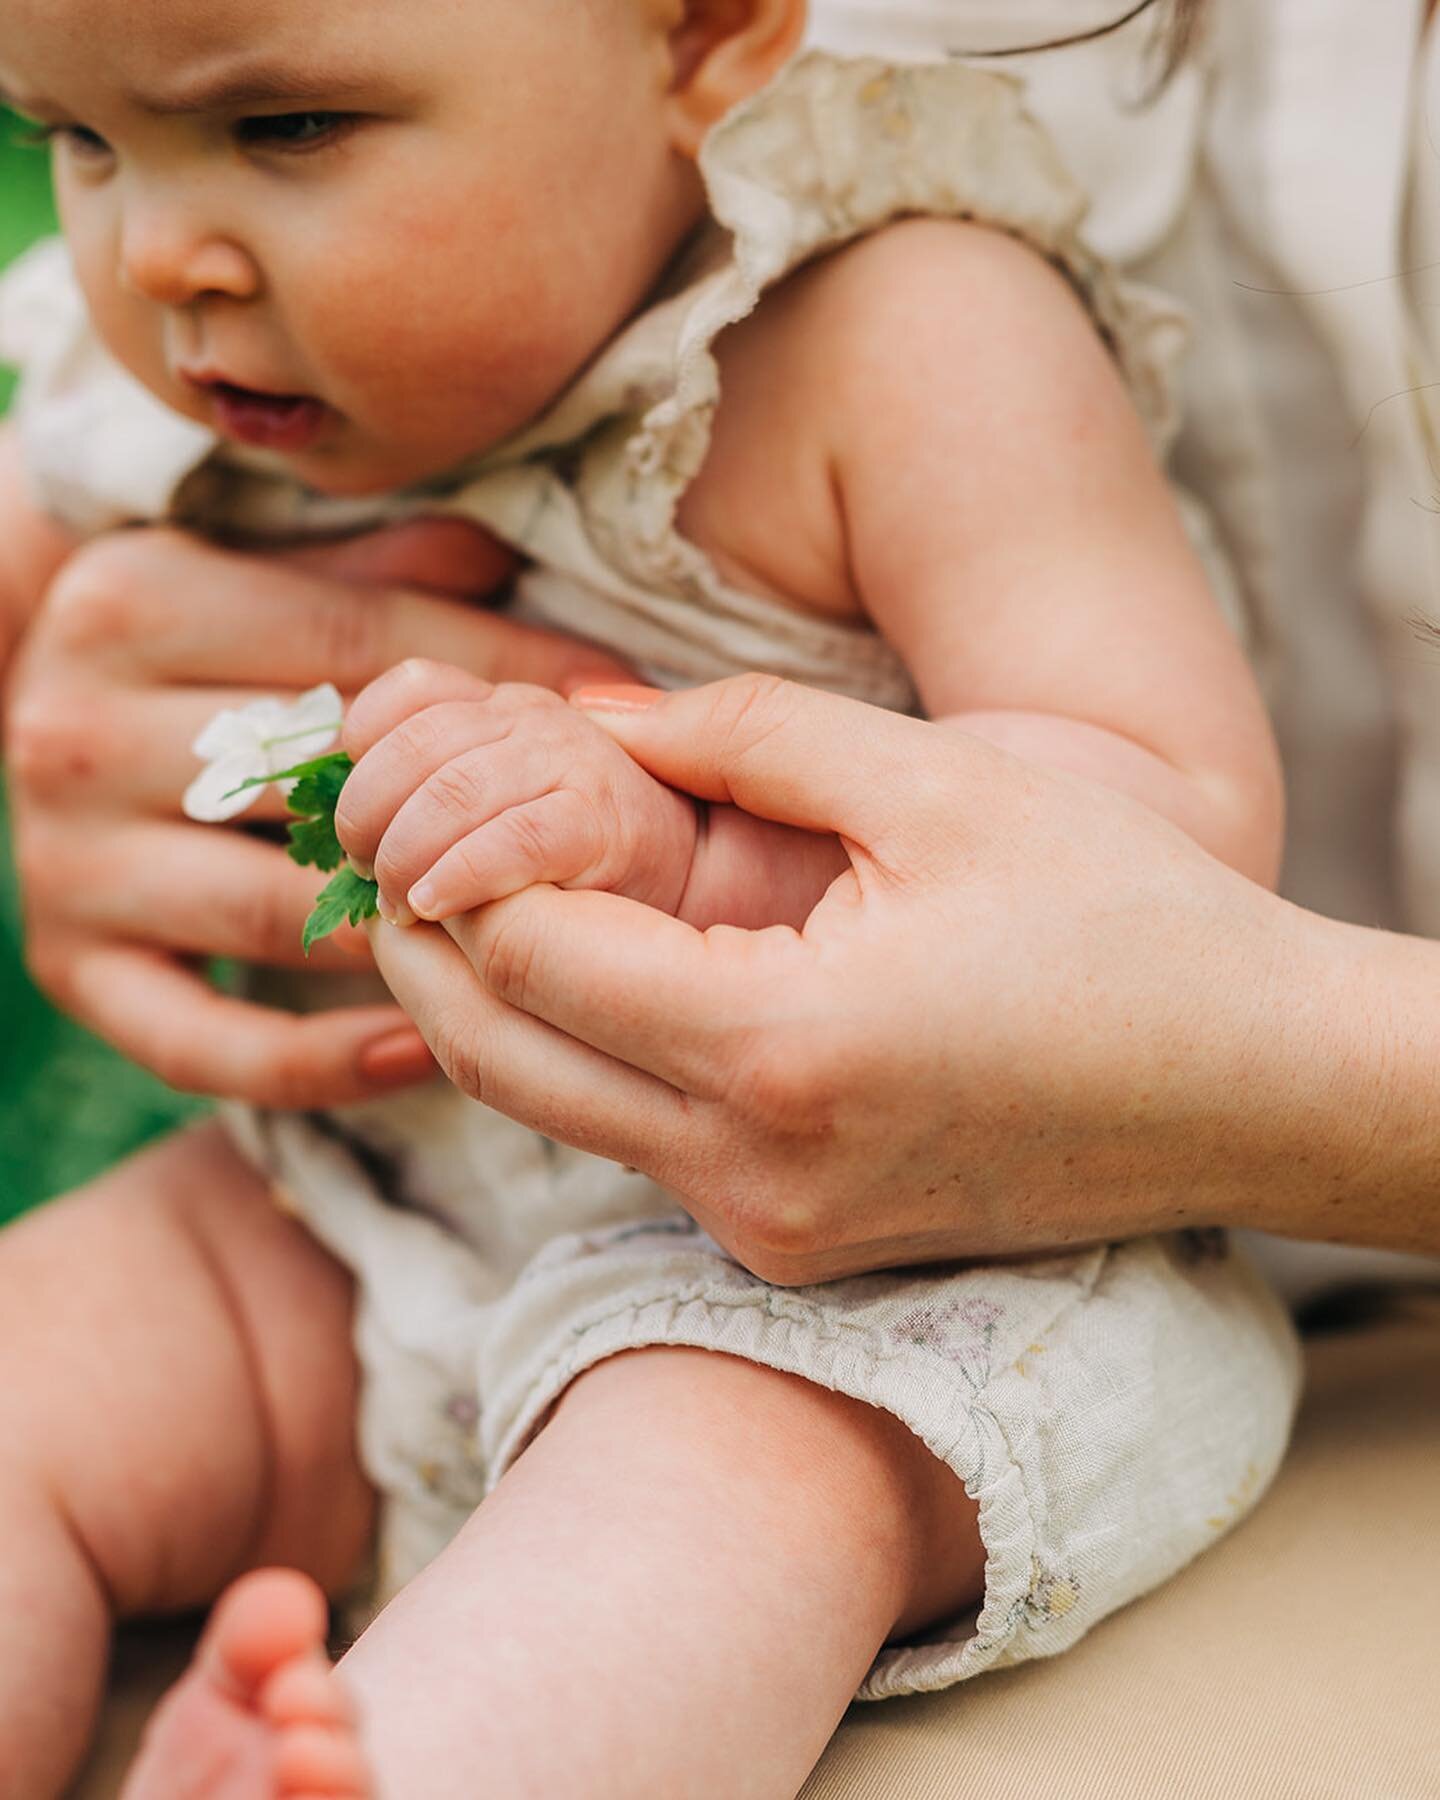 Your babies won&rsquo;t stay babies forever 🥺 So let&rsquo;s take some photos this spring and summer to document this sweet chapter in your lives. I want your photos to help you remember how holding your baby&rsquo;s tiny little hand felt. Or the jo